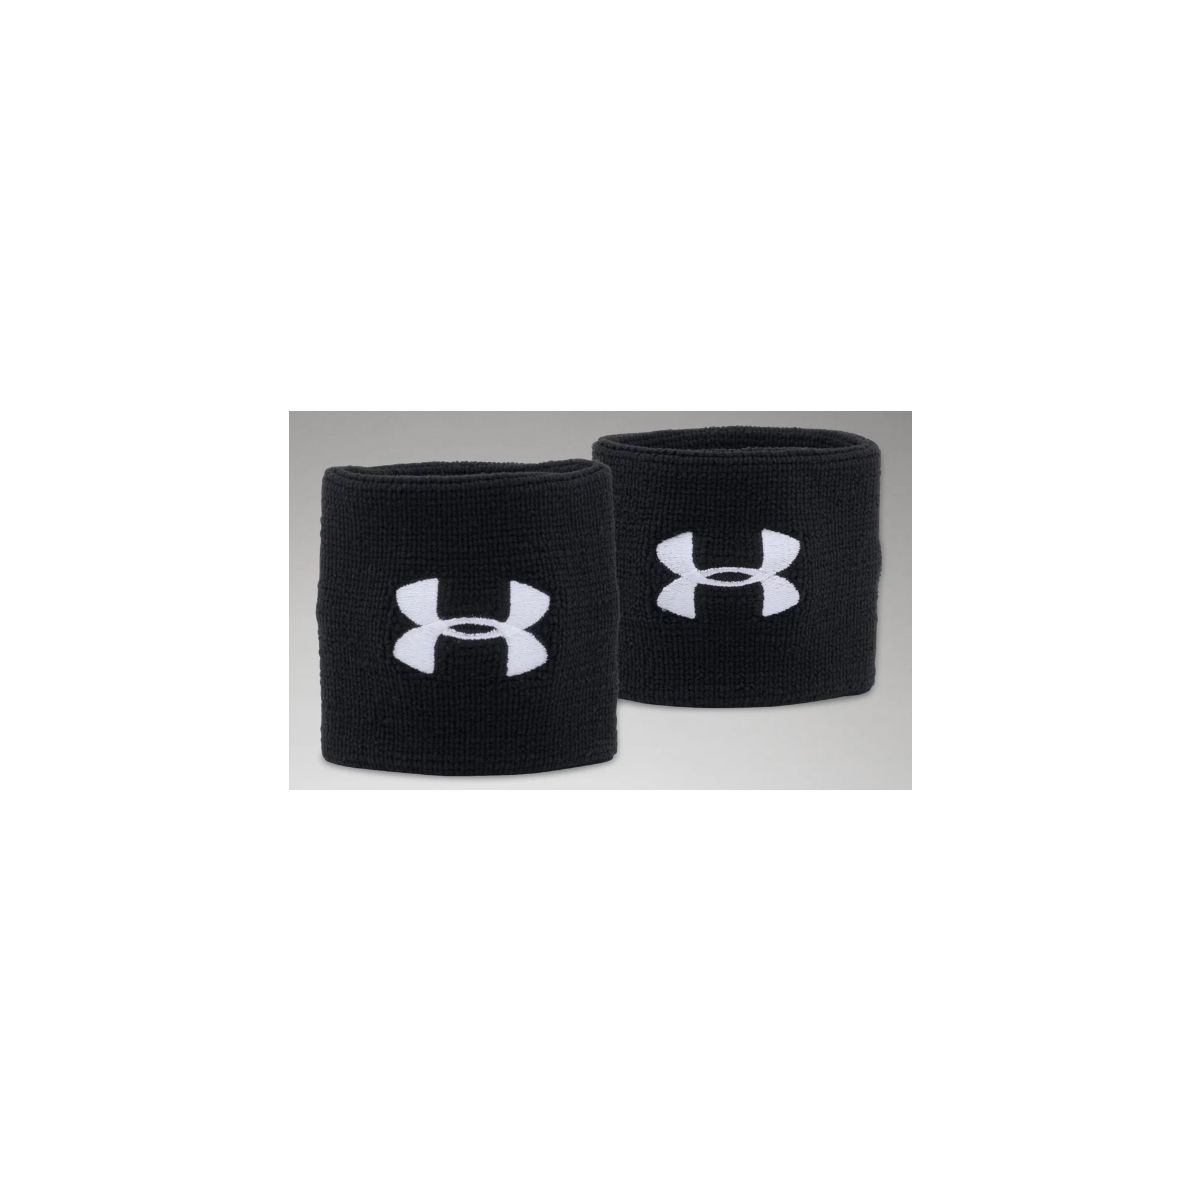 Under Armour 3" Pack Wristbands 1276991